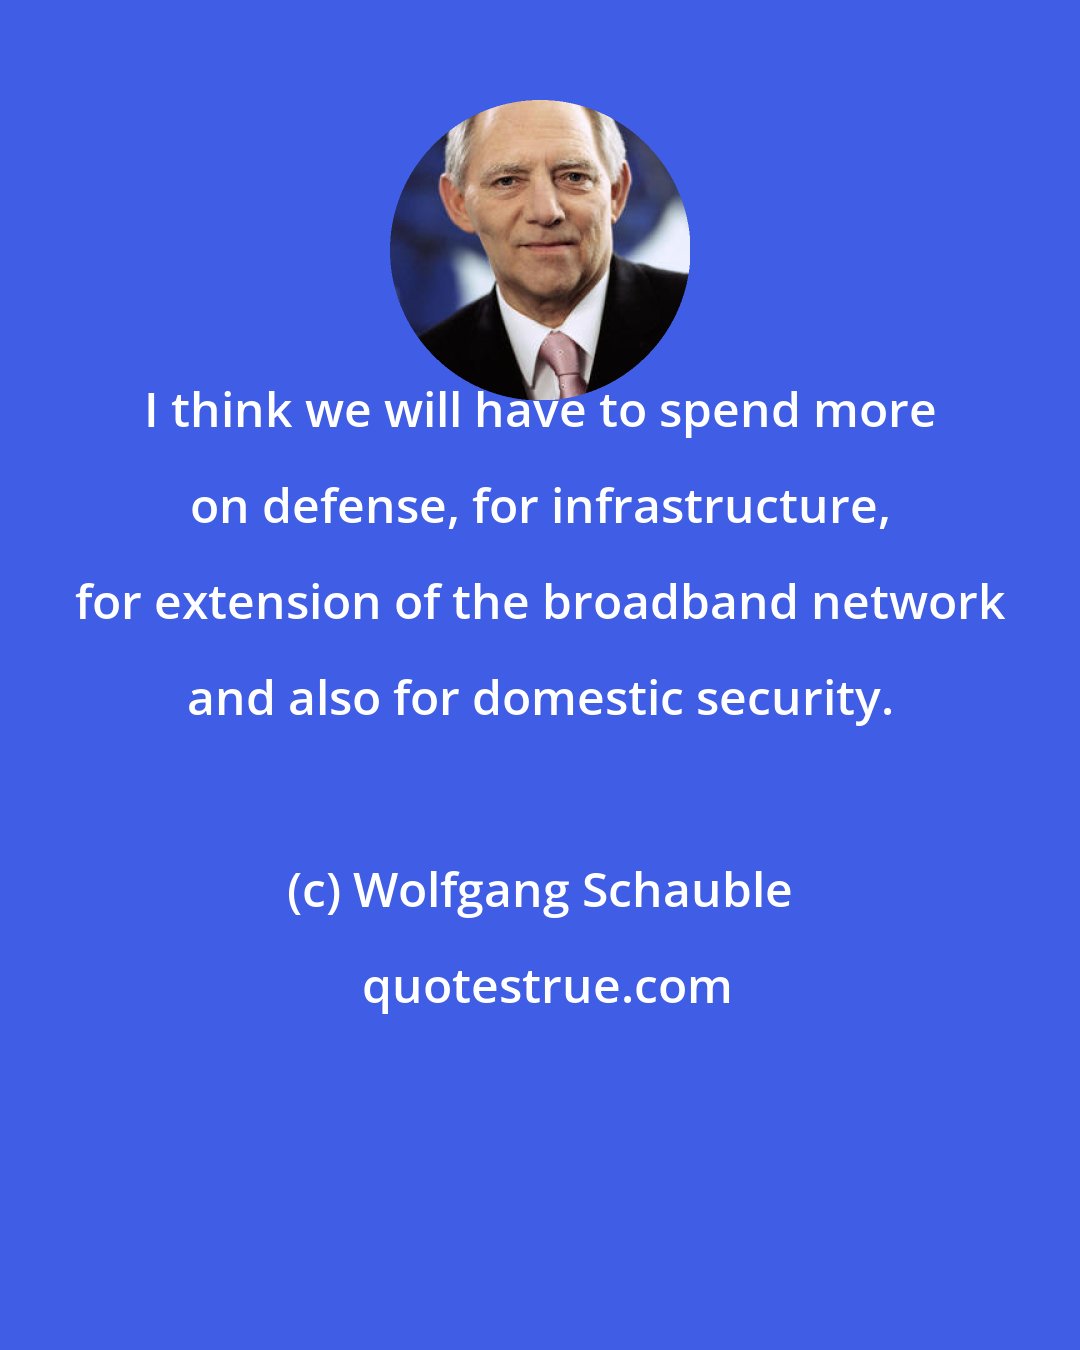 Wolfgang Schauble: I think we will have to spend more on defense, for infrastructure, for extension of the broadband network and also for domestic security.